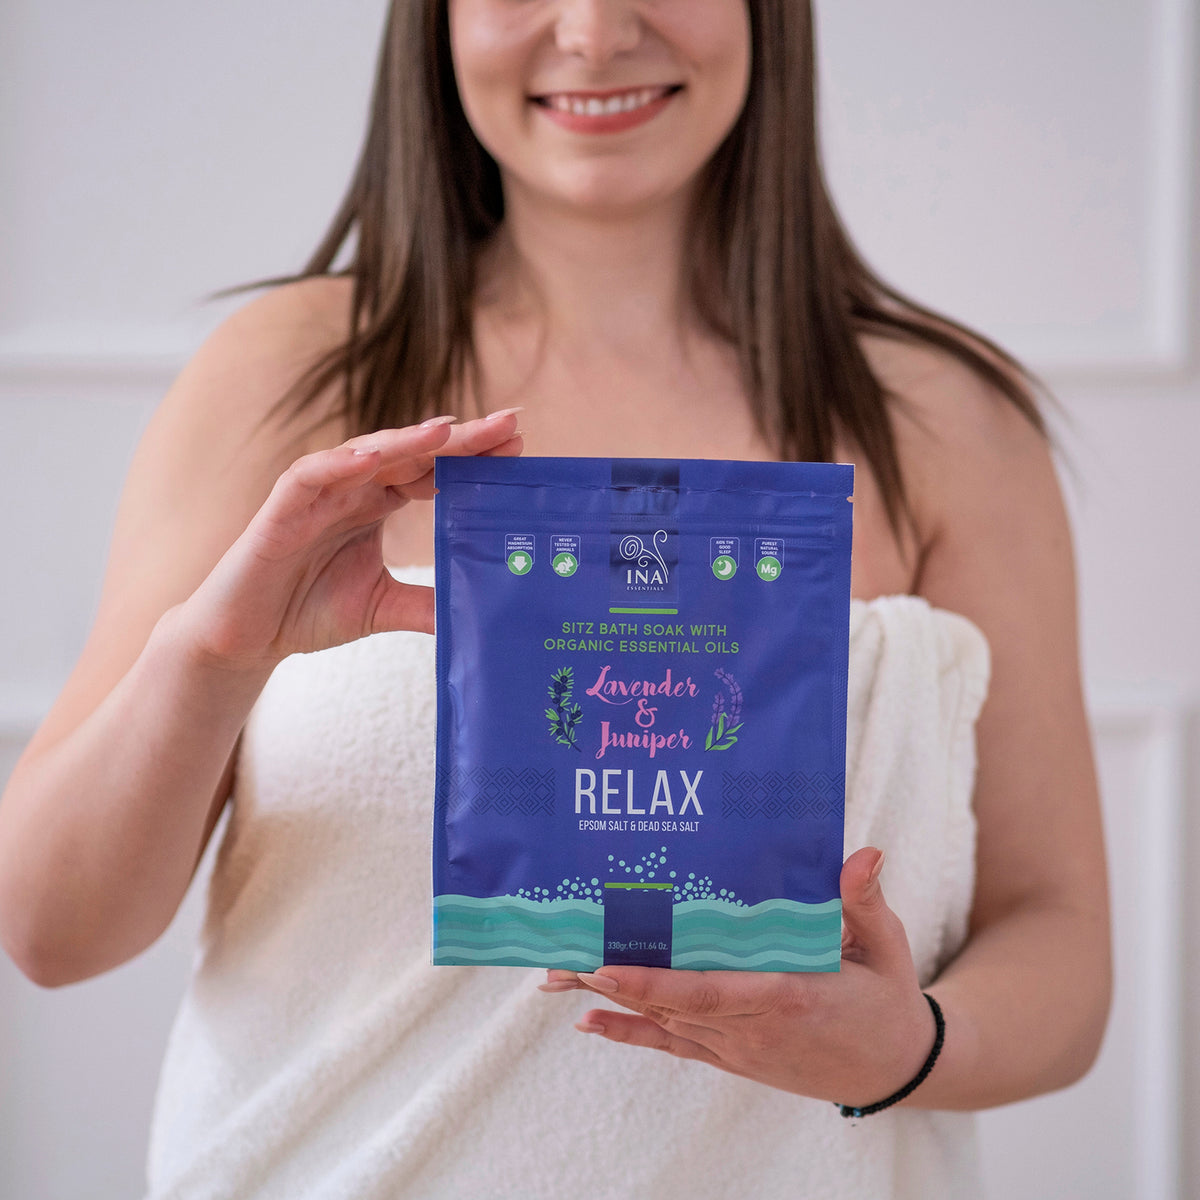 Relax - Bathing salt with Lavender and Juniper for Relaxation and Stress relief